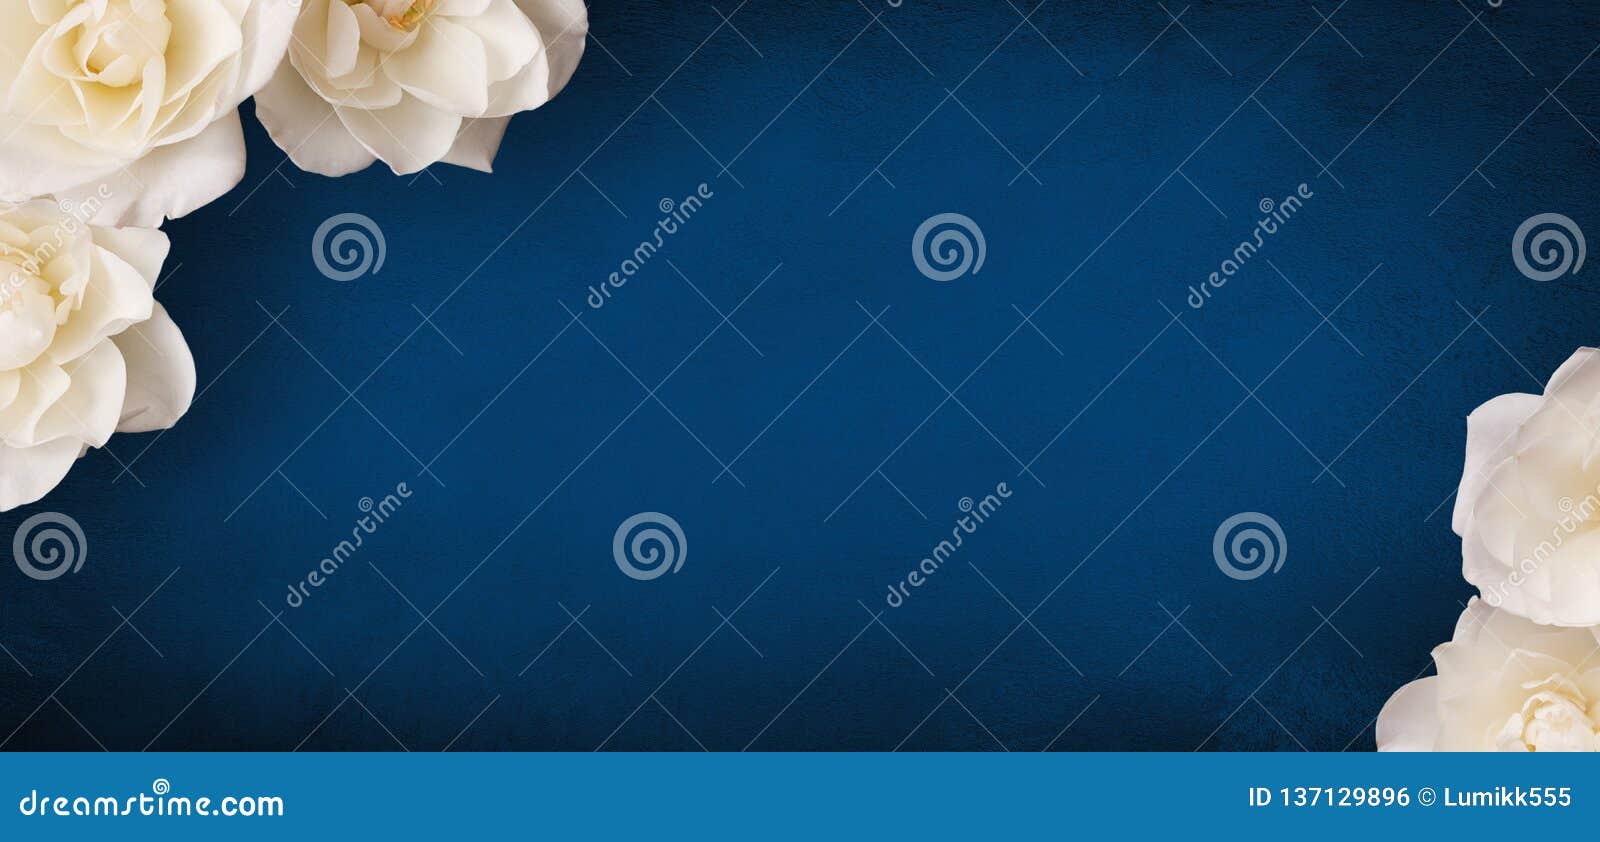 beautiful flower background with copy space for text